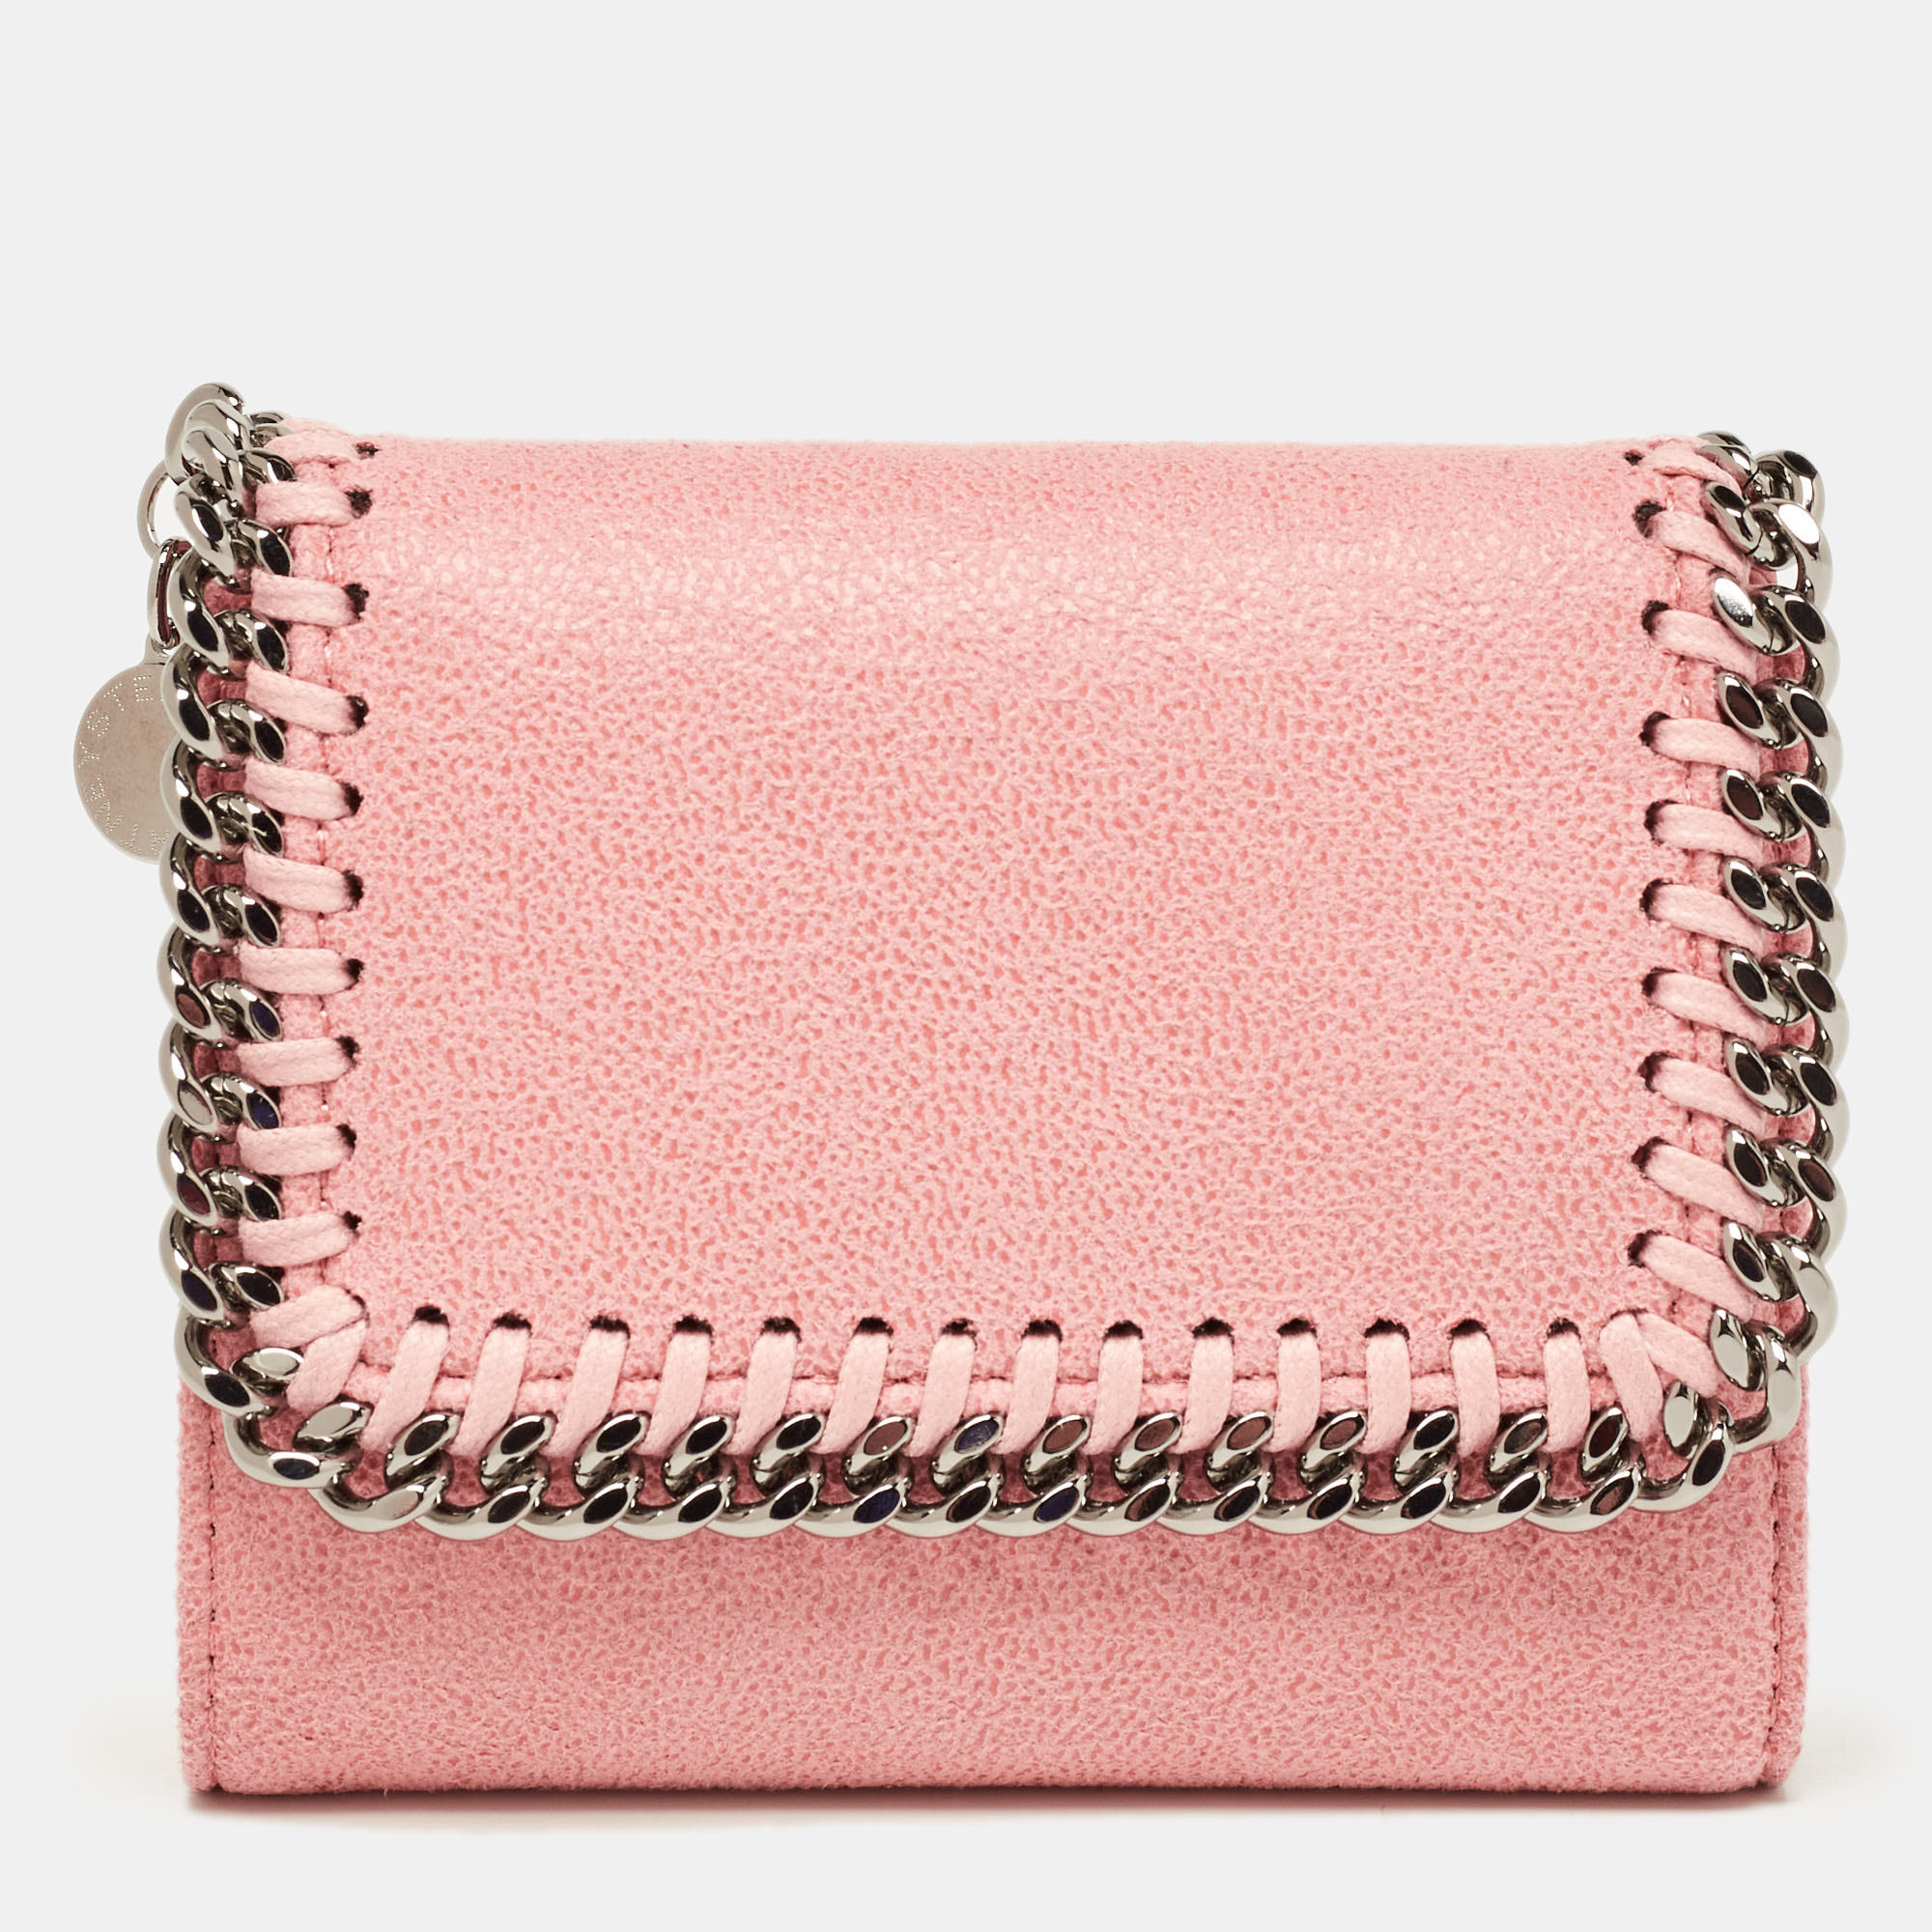 Pre-owned Stella Mccartney Pink Faux Leather Falabella Compact Wallet